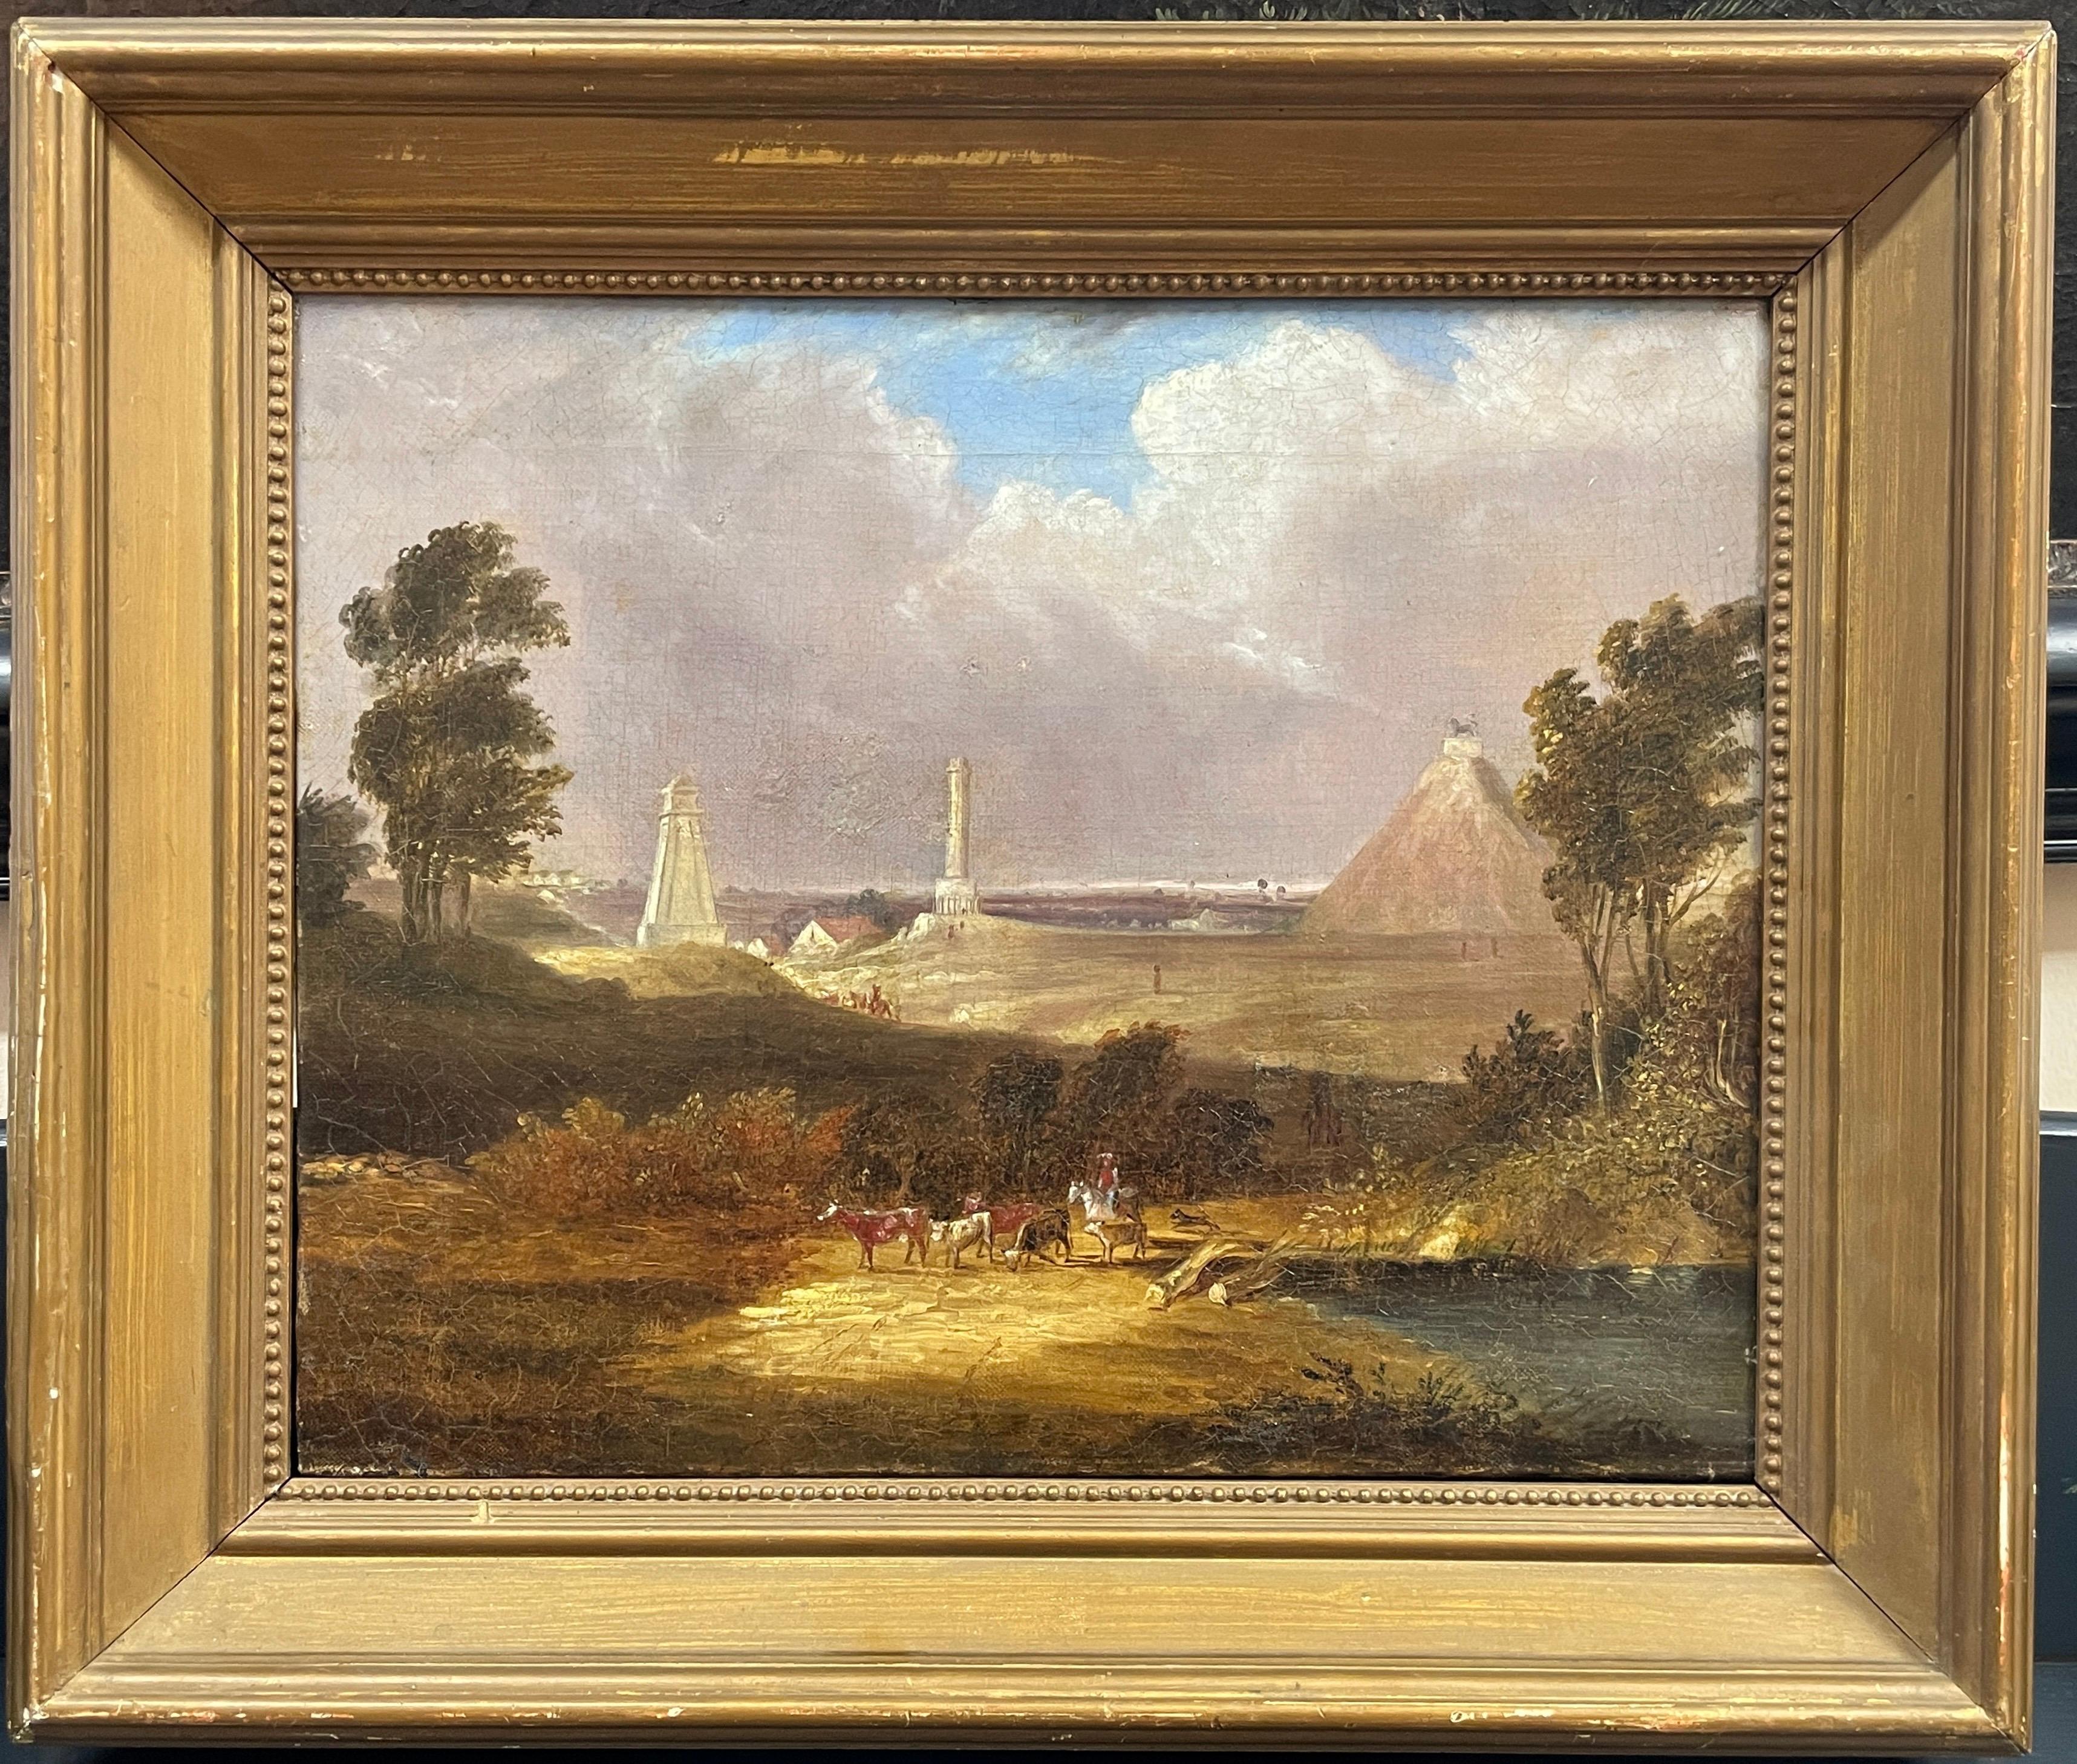 The Battlefield of Waterloo
English School, 19th century
original oil painting on canvas, framed
canvas: 12 x 15.5 inches
framed: 17.5 x 20.5 inches
condition: overall very good and presentable, some former restoration and signs of retouching